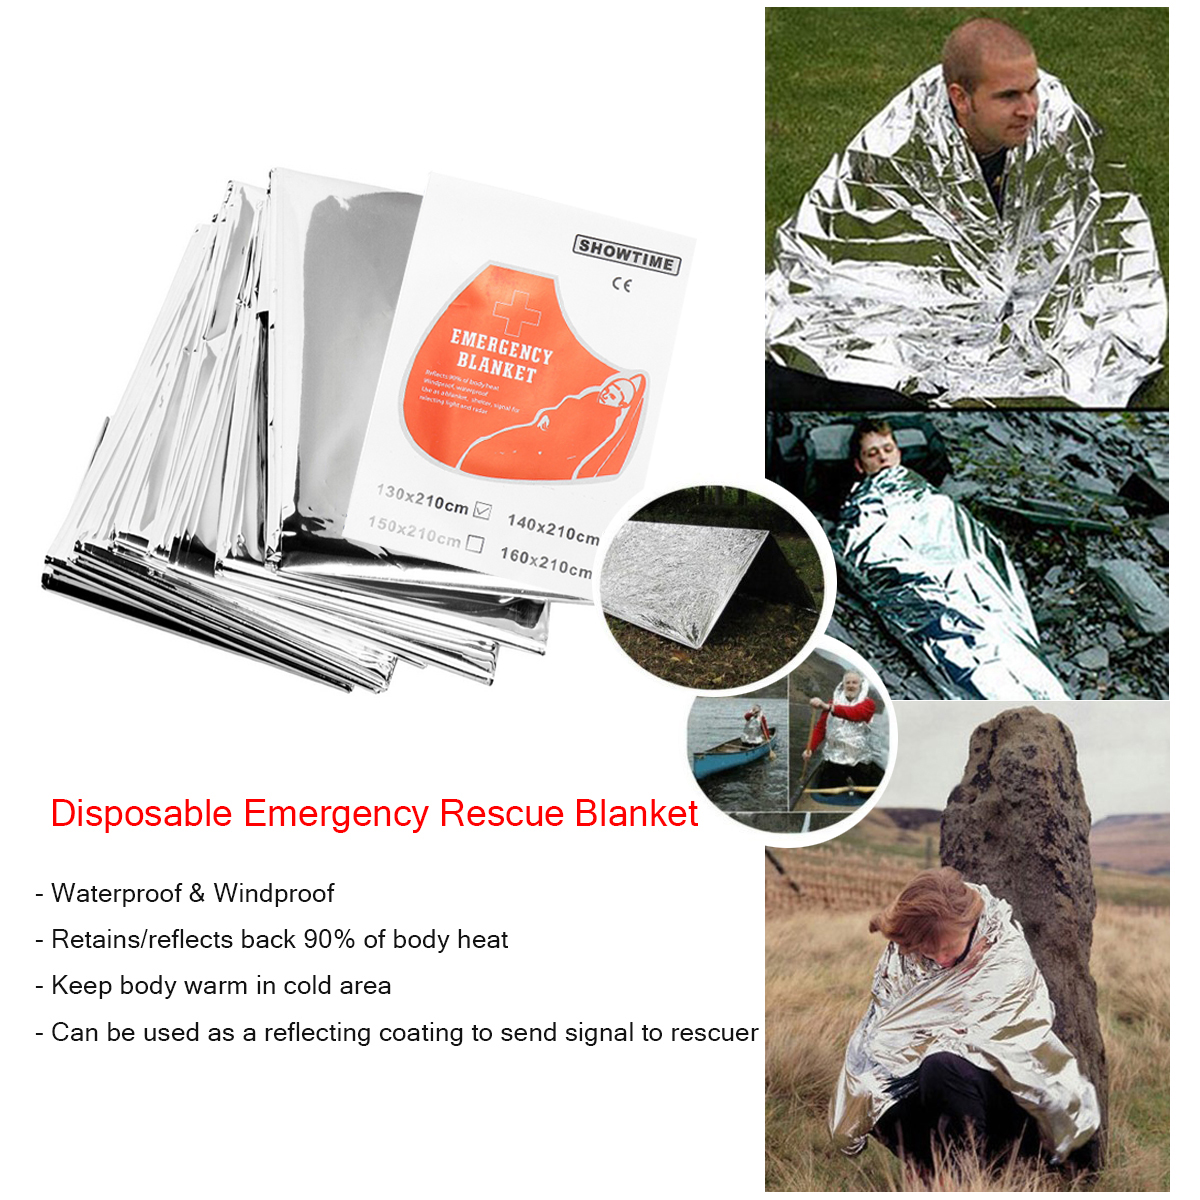 Upgraded-Outdoor-Emergency-Survival-First-Aid-Kit-Gear-for-Home-Office-Car-Boat-Camping-Hiking-Trave-1415500-6